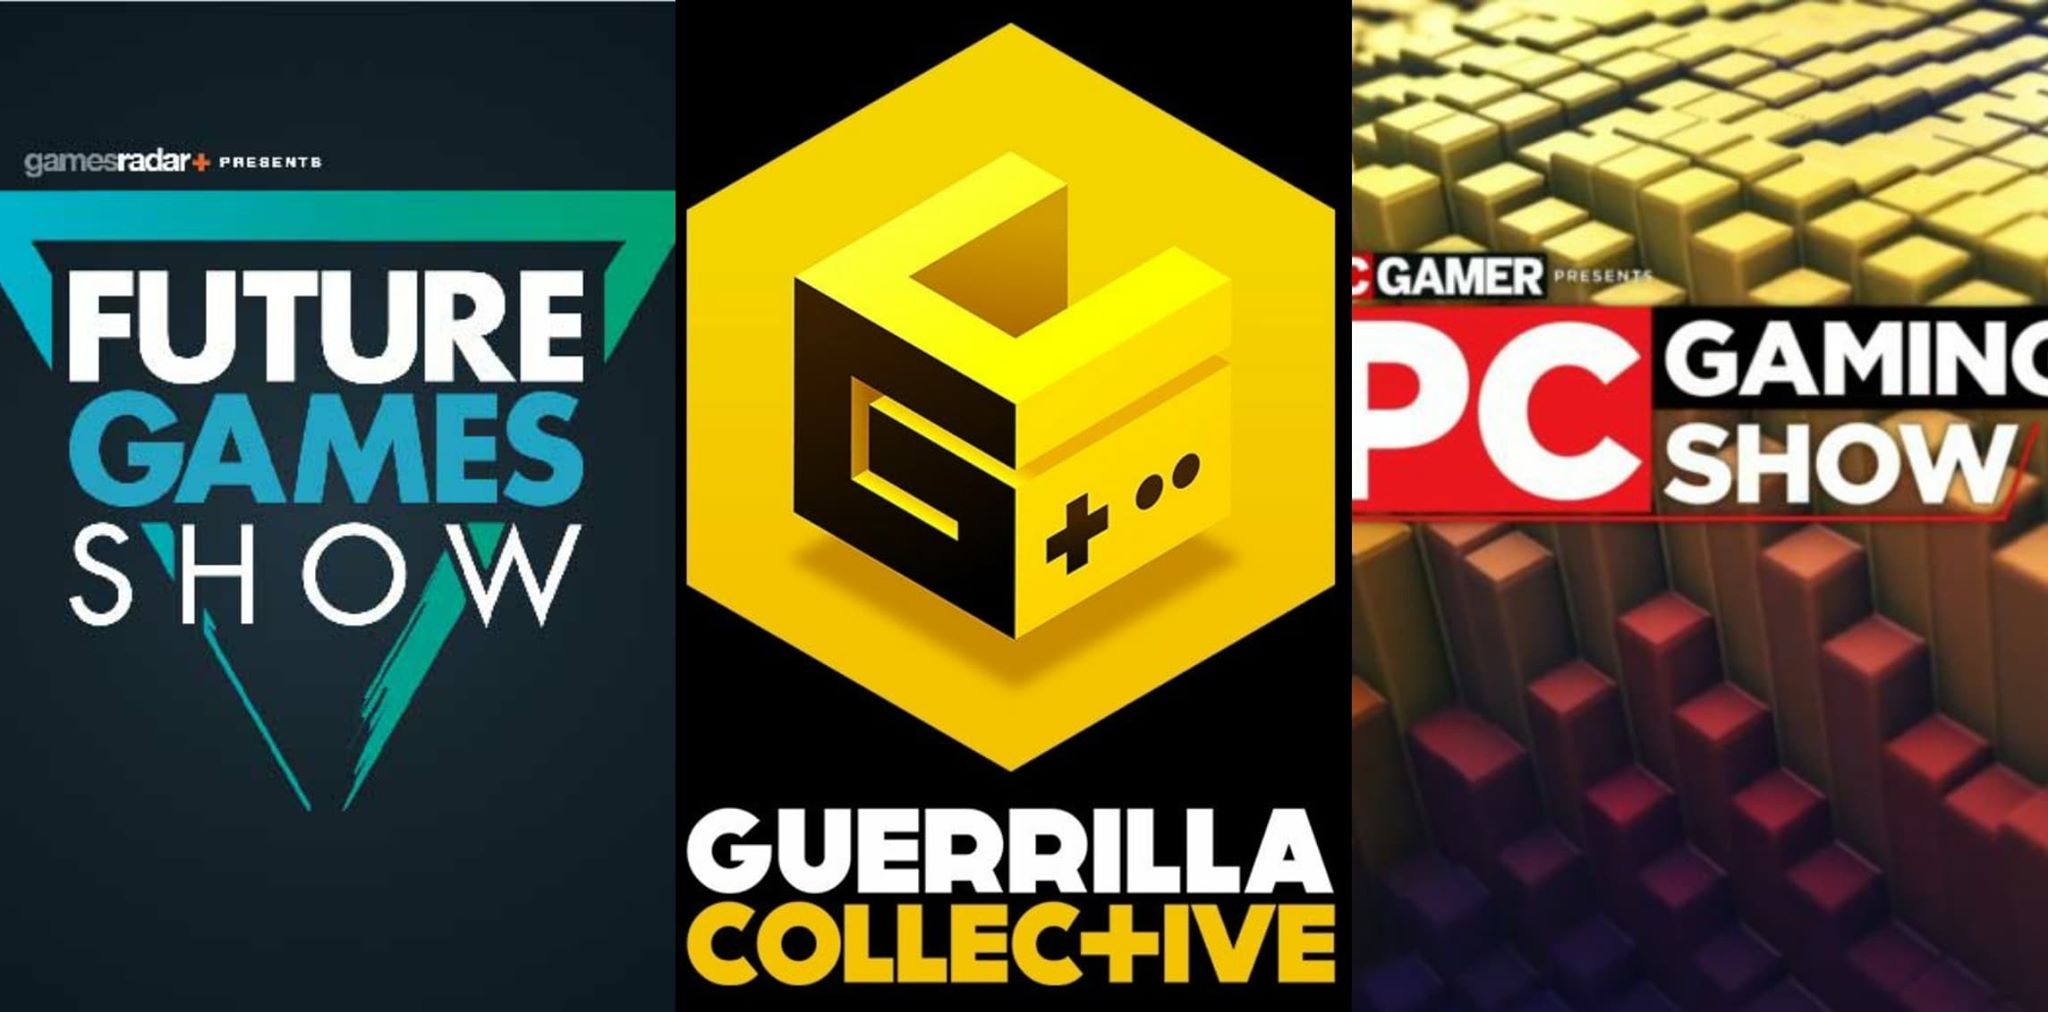 Future Games Show, Guerrilla Collective, PC Gaming Show